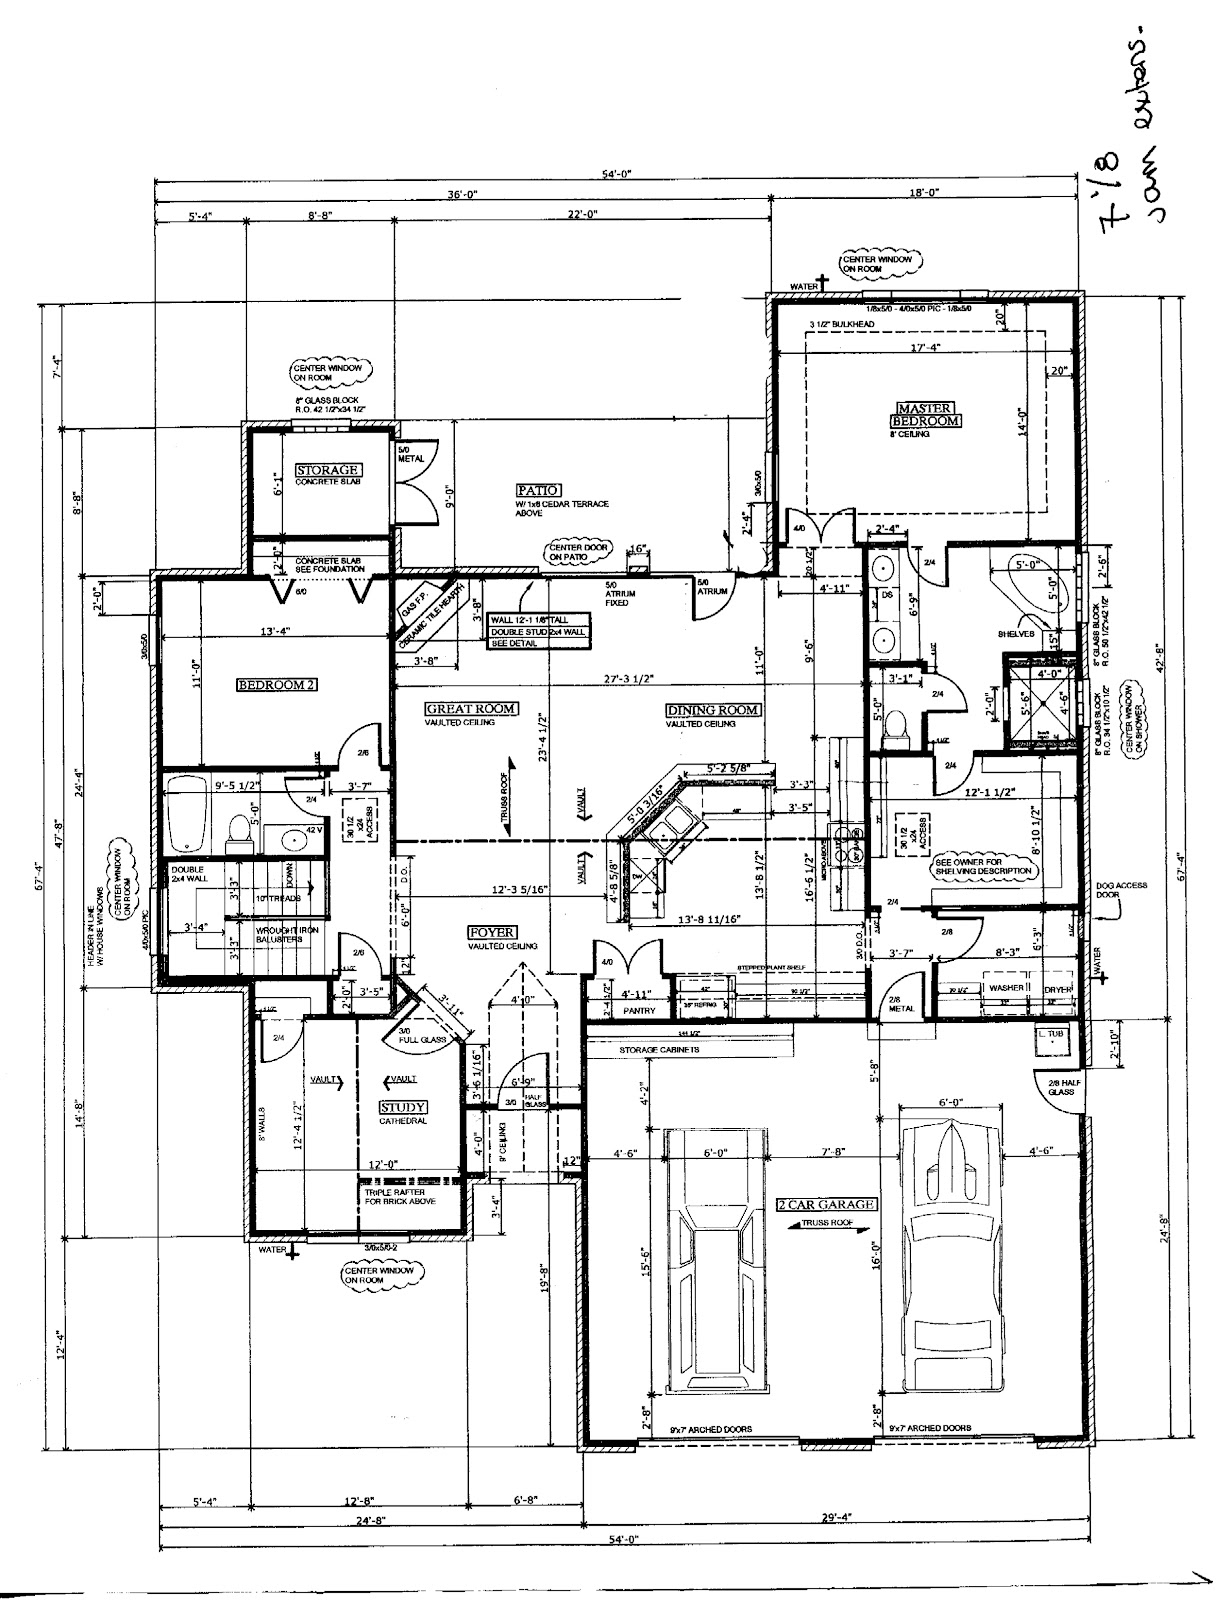 House Floor Plan With Dimensions Main floor plan - please note